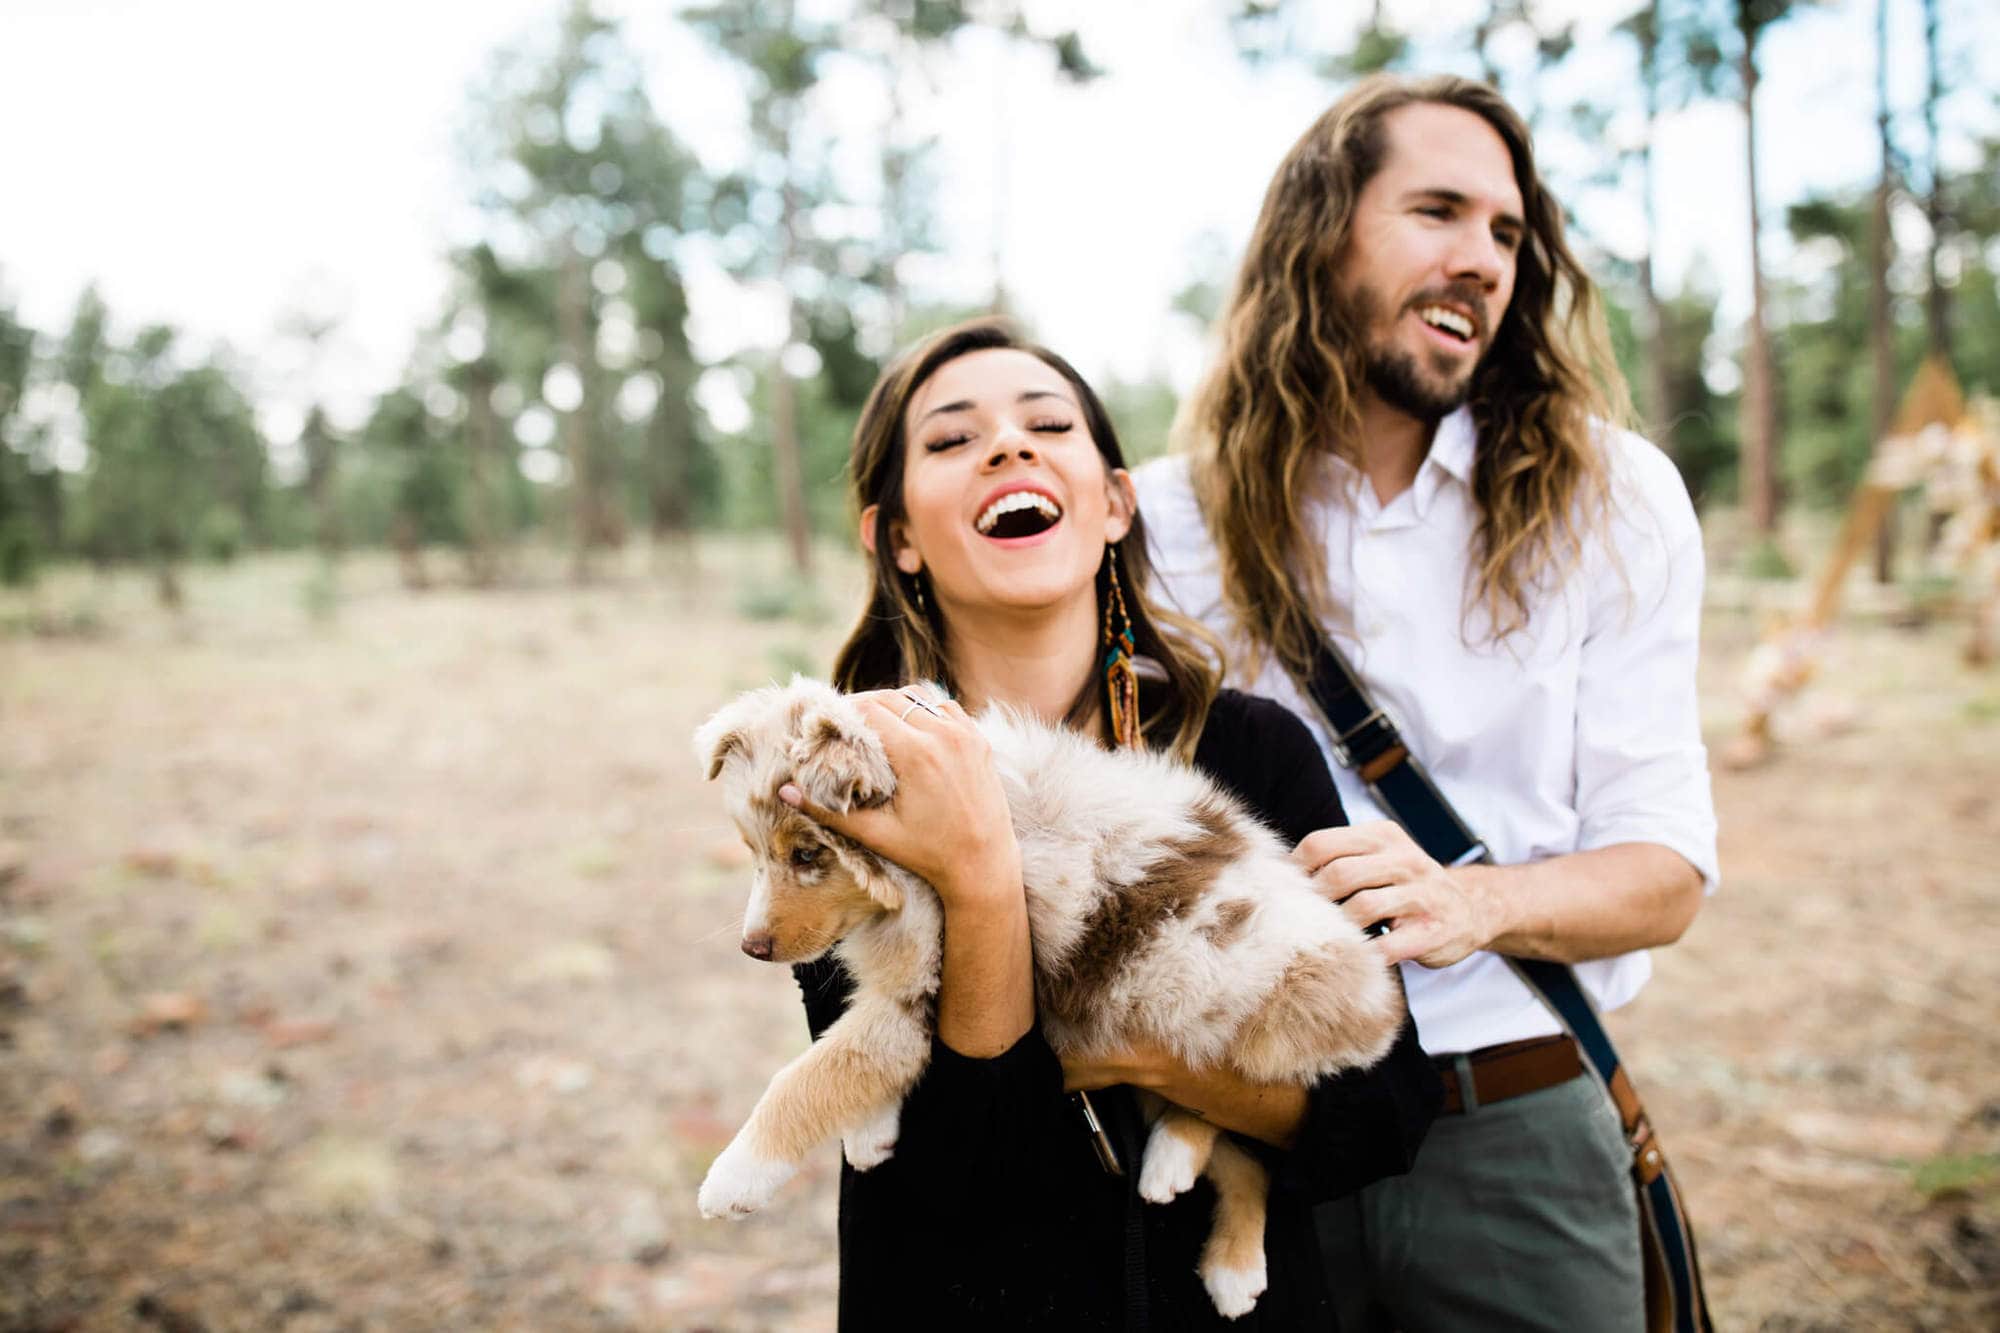 The couple holds a puppy and laughs during the forest engagement photos.